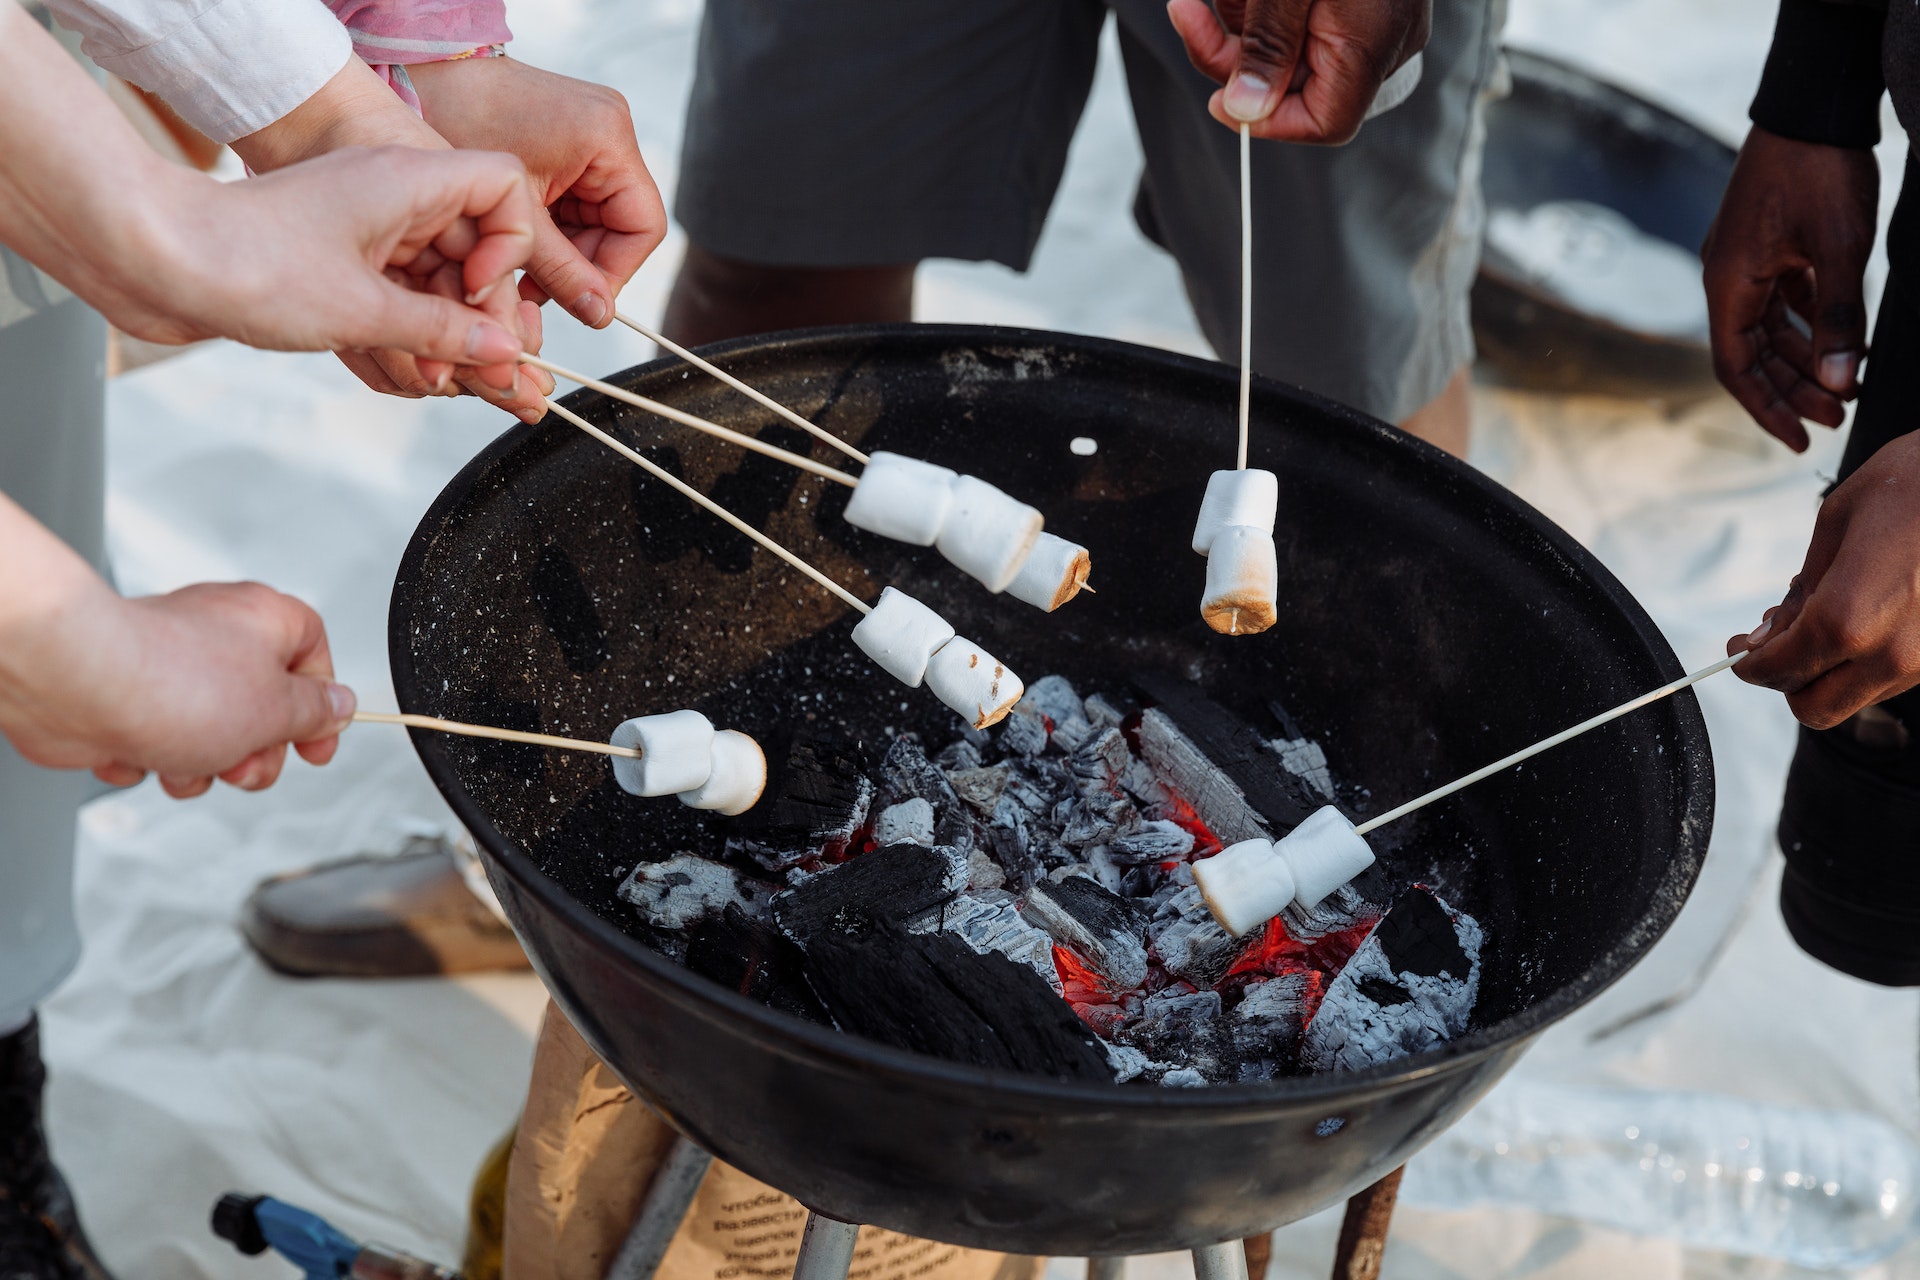 A photo of friends holding skewers of marshmallows over a beach fire pit